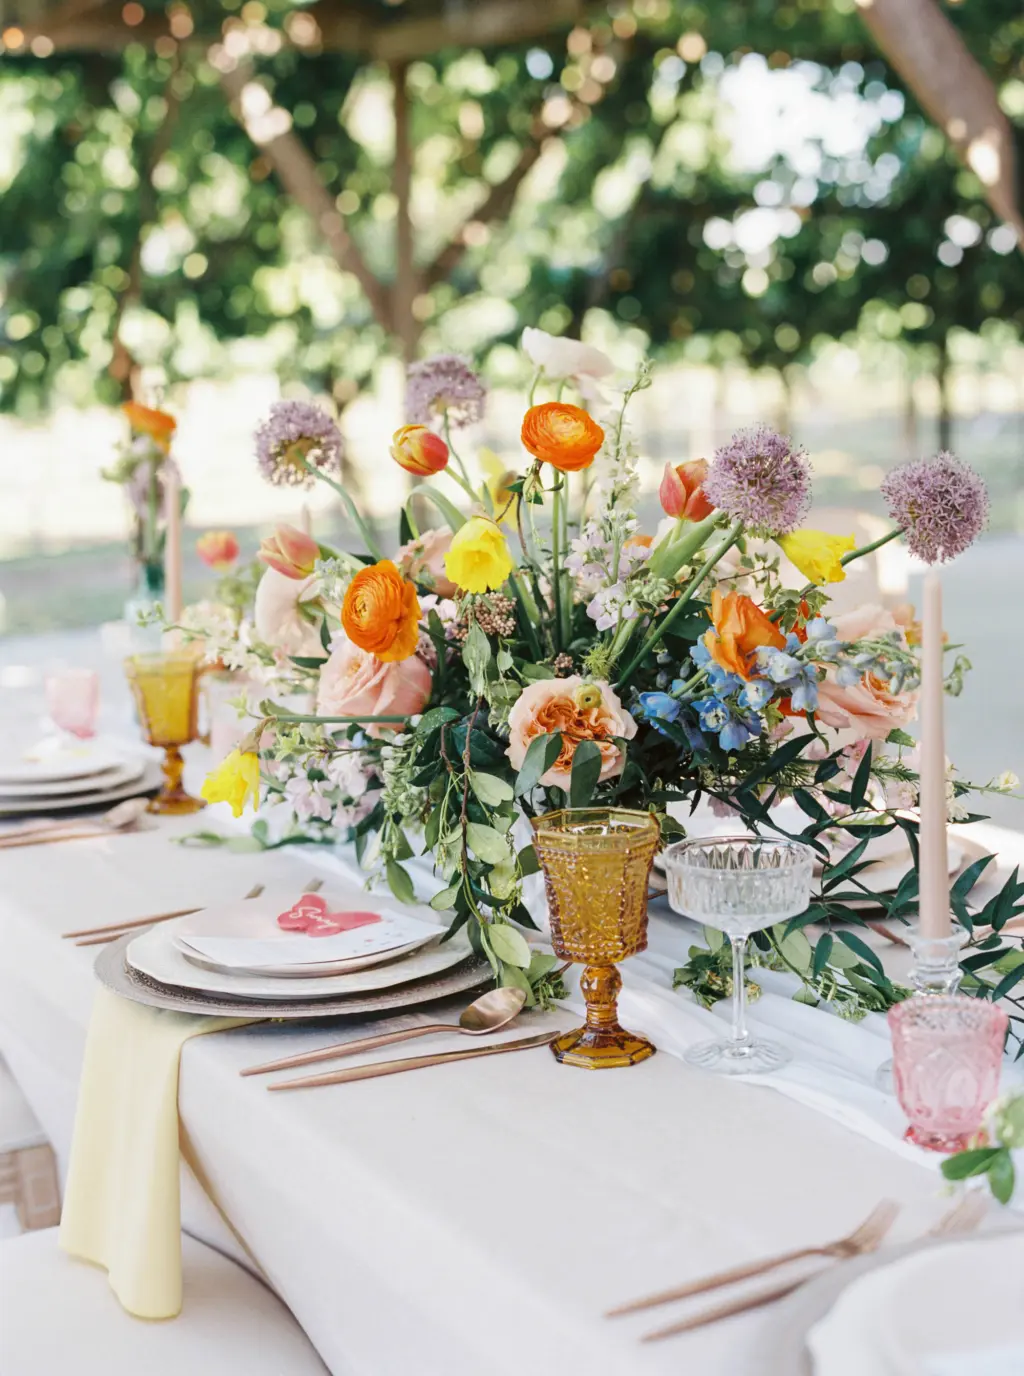 Whimsical Wedding Reception Centerpiece Ideas with Orange Ranunculus, Pink Garden Roses, Purple Allium, Blue Stock Flowers, Tulips, and Yellow Daffodils | Colored Goblets, and Bronze Flatware | Tampa Bay Florist Save The Date Florida